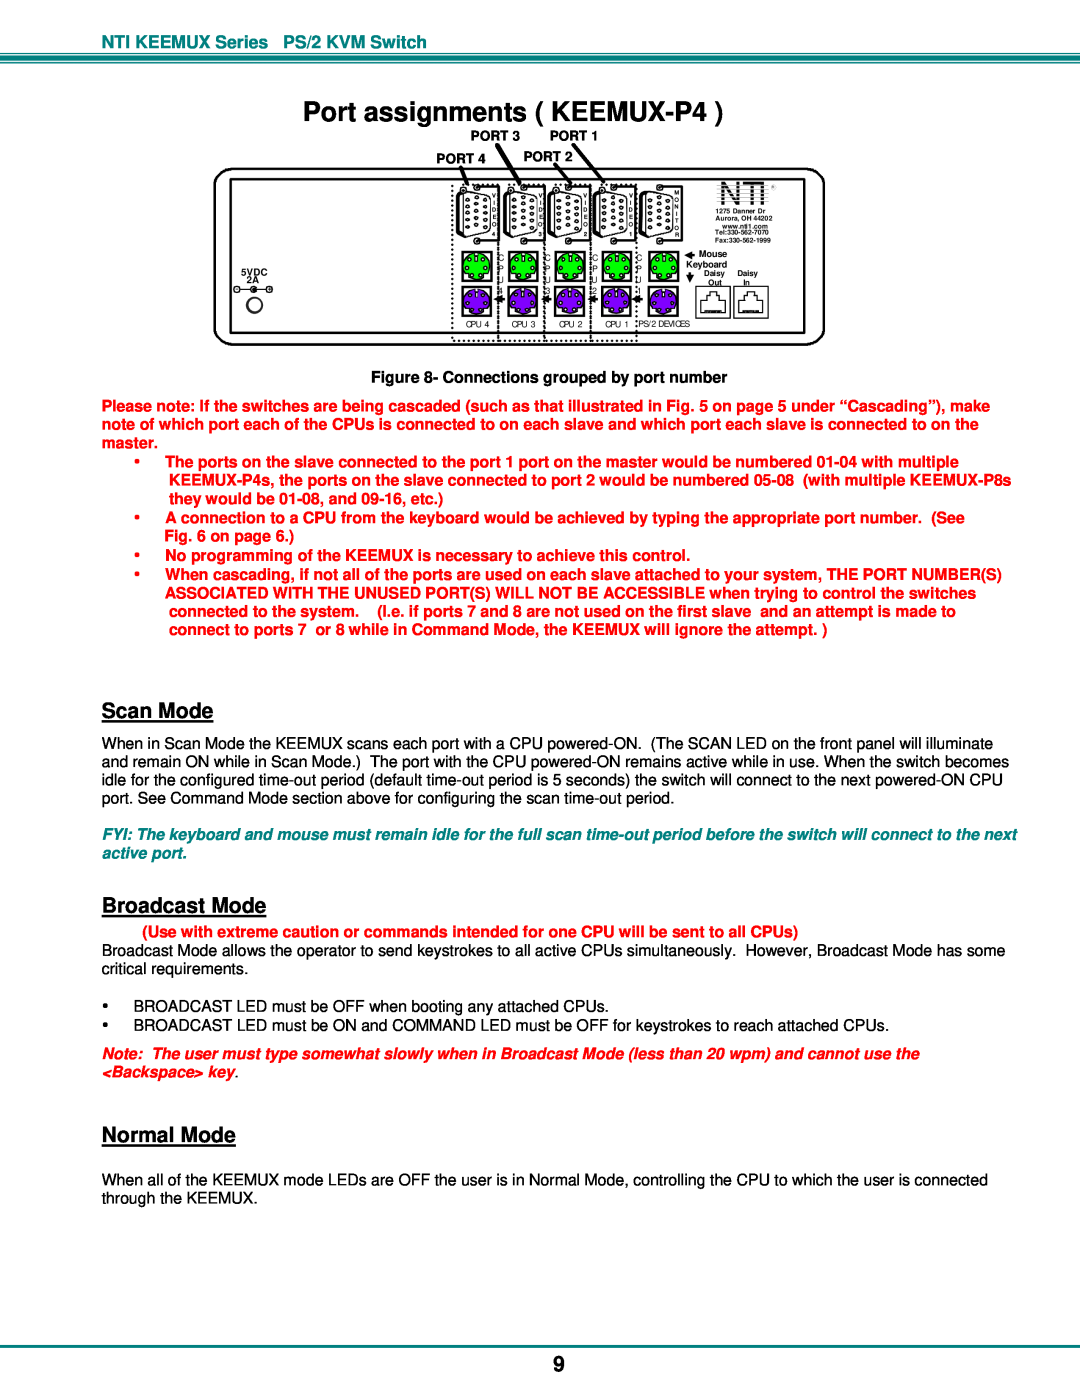 Network Technologies PS/2 KVM operation manual Port assignments KEEMUX-P4, Scan Mode, Broadcast Mode, Normal Mode 